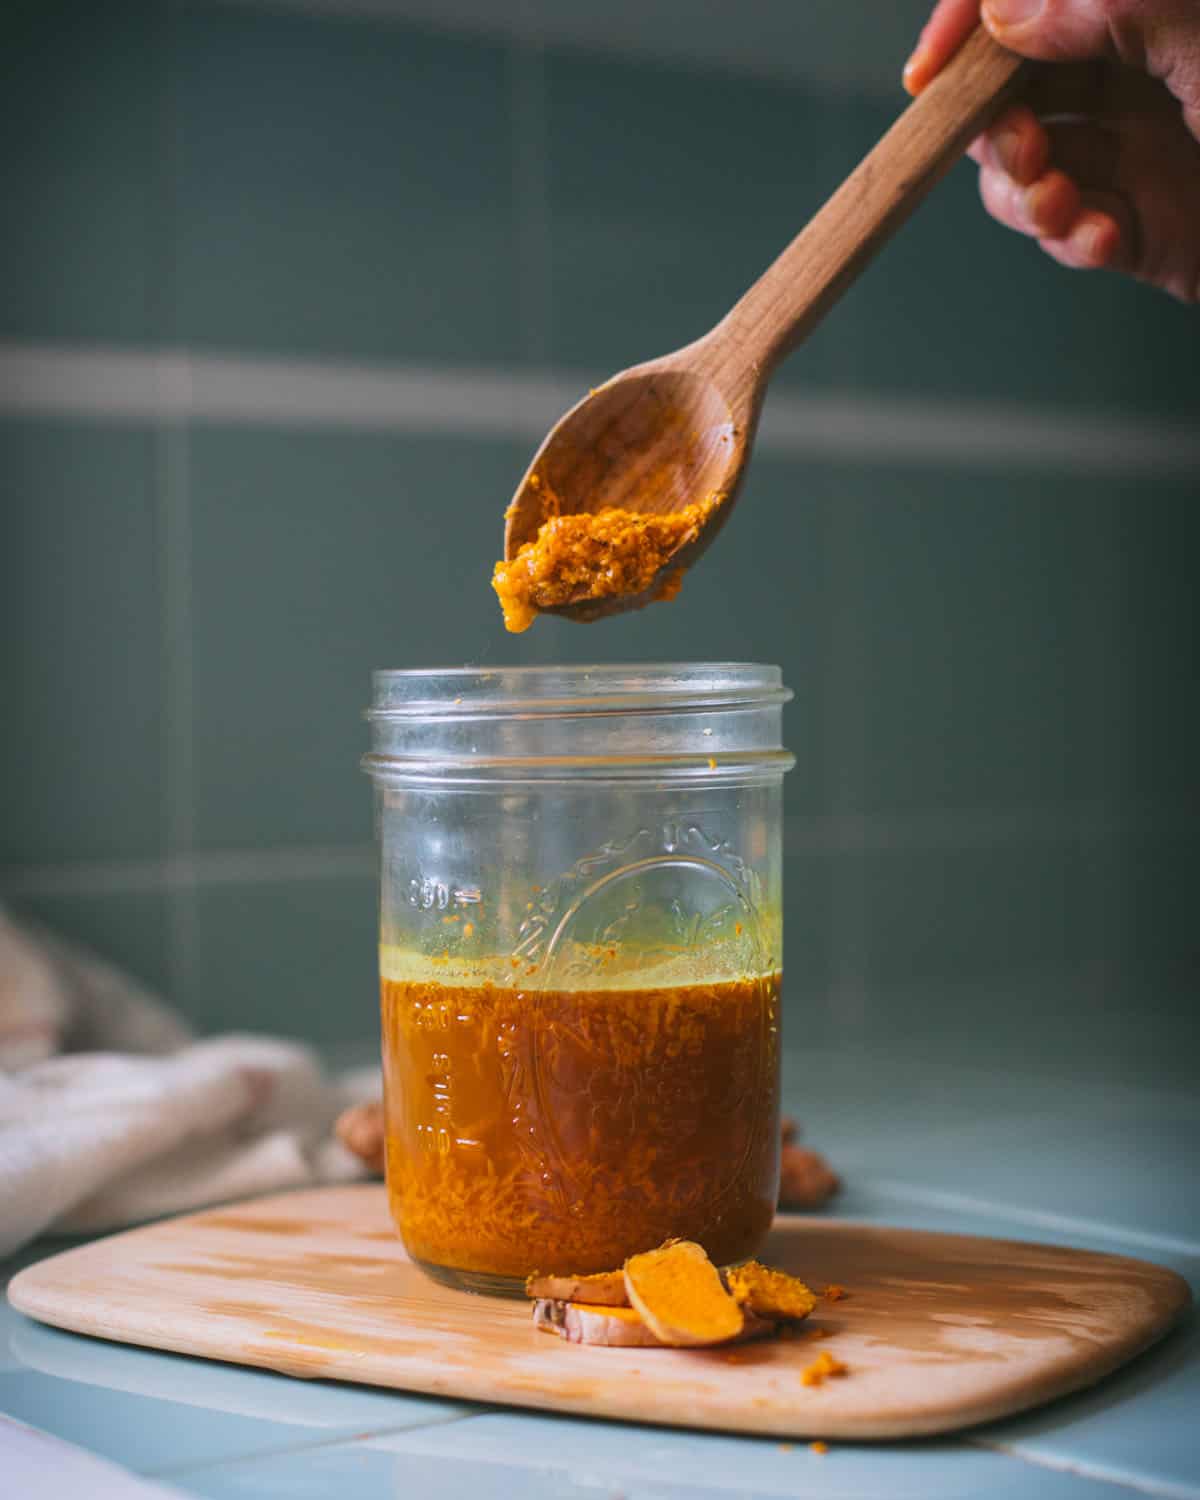 adding fresh grated turmeric root with a wooden spoon to the turmeric bug